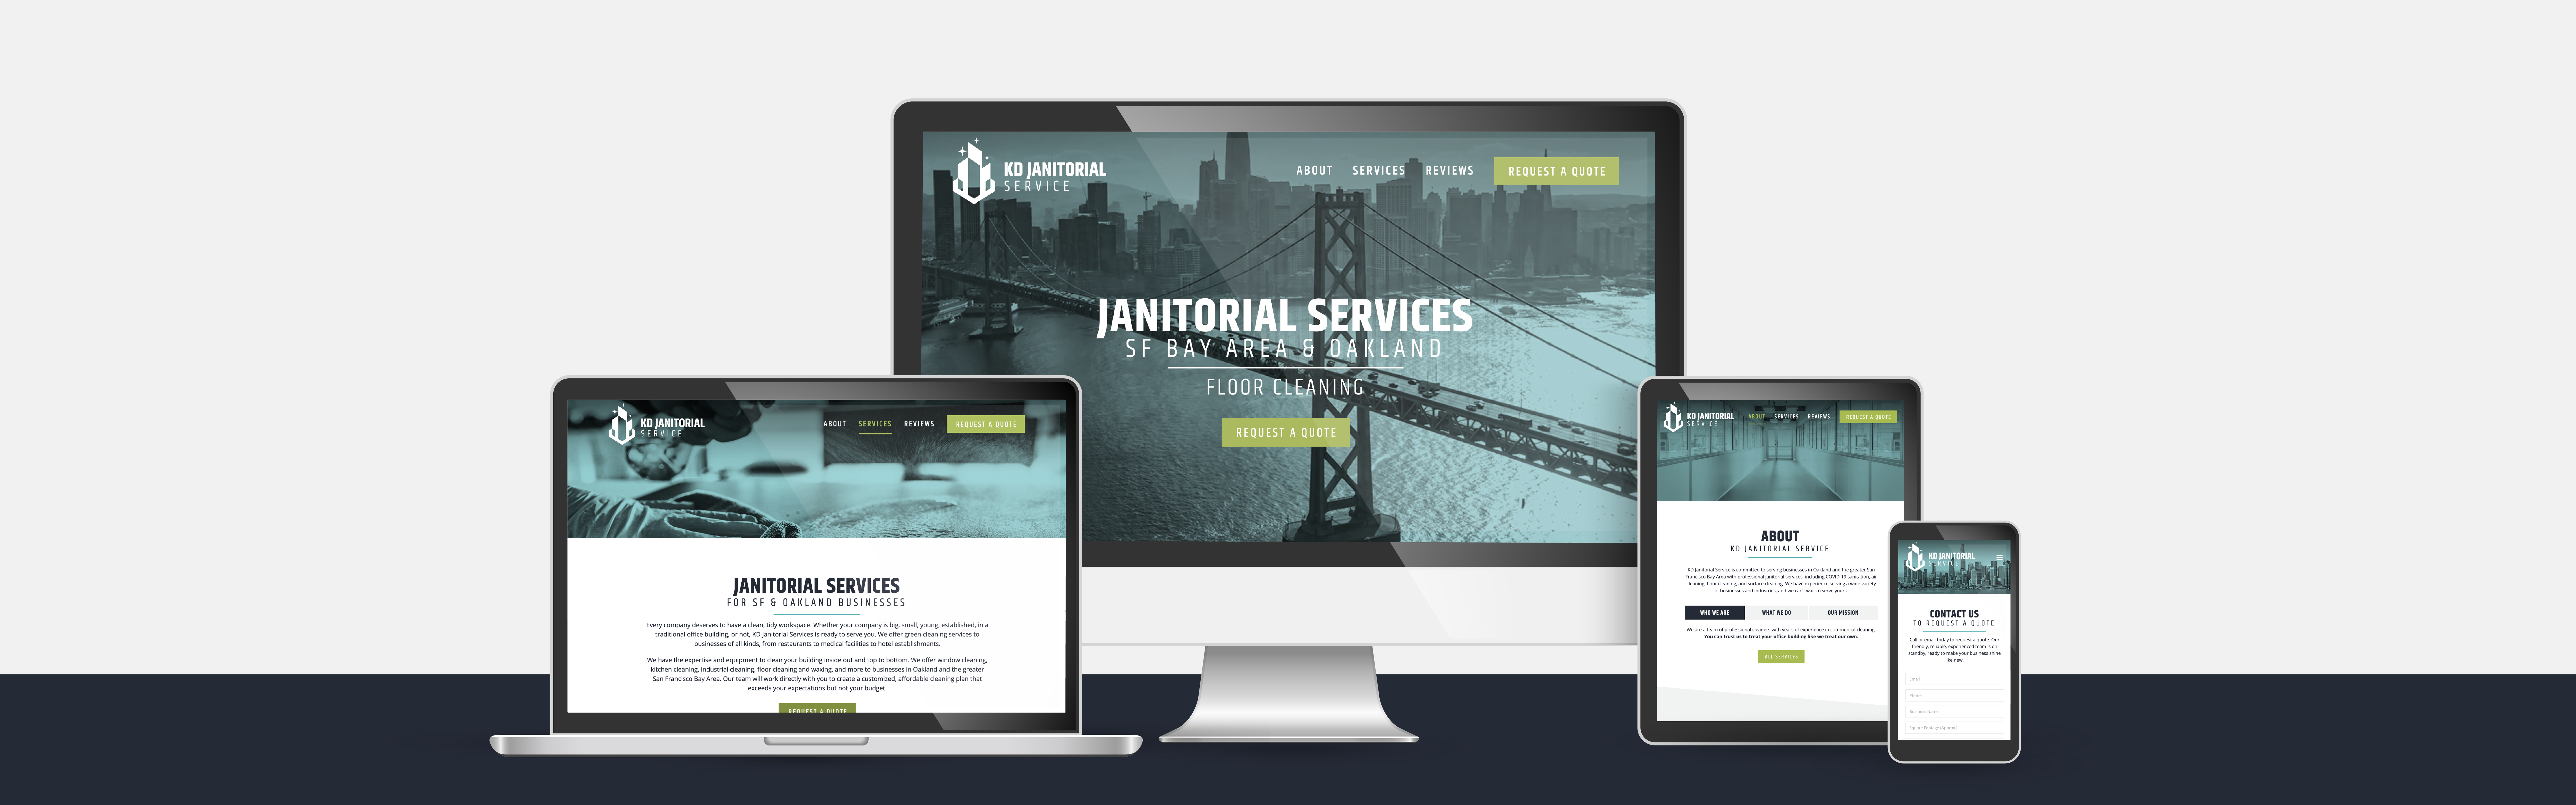 Responsive web design displayed across multiple devices including a desktop computer, a tablet, and a smartphone, showcasing a website for "KD Janitorial Service" with an image of a bridge.